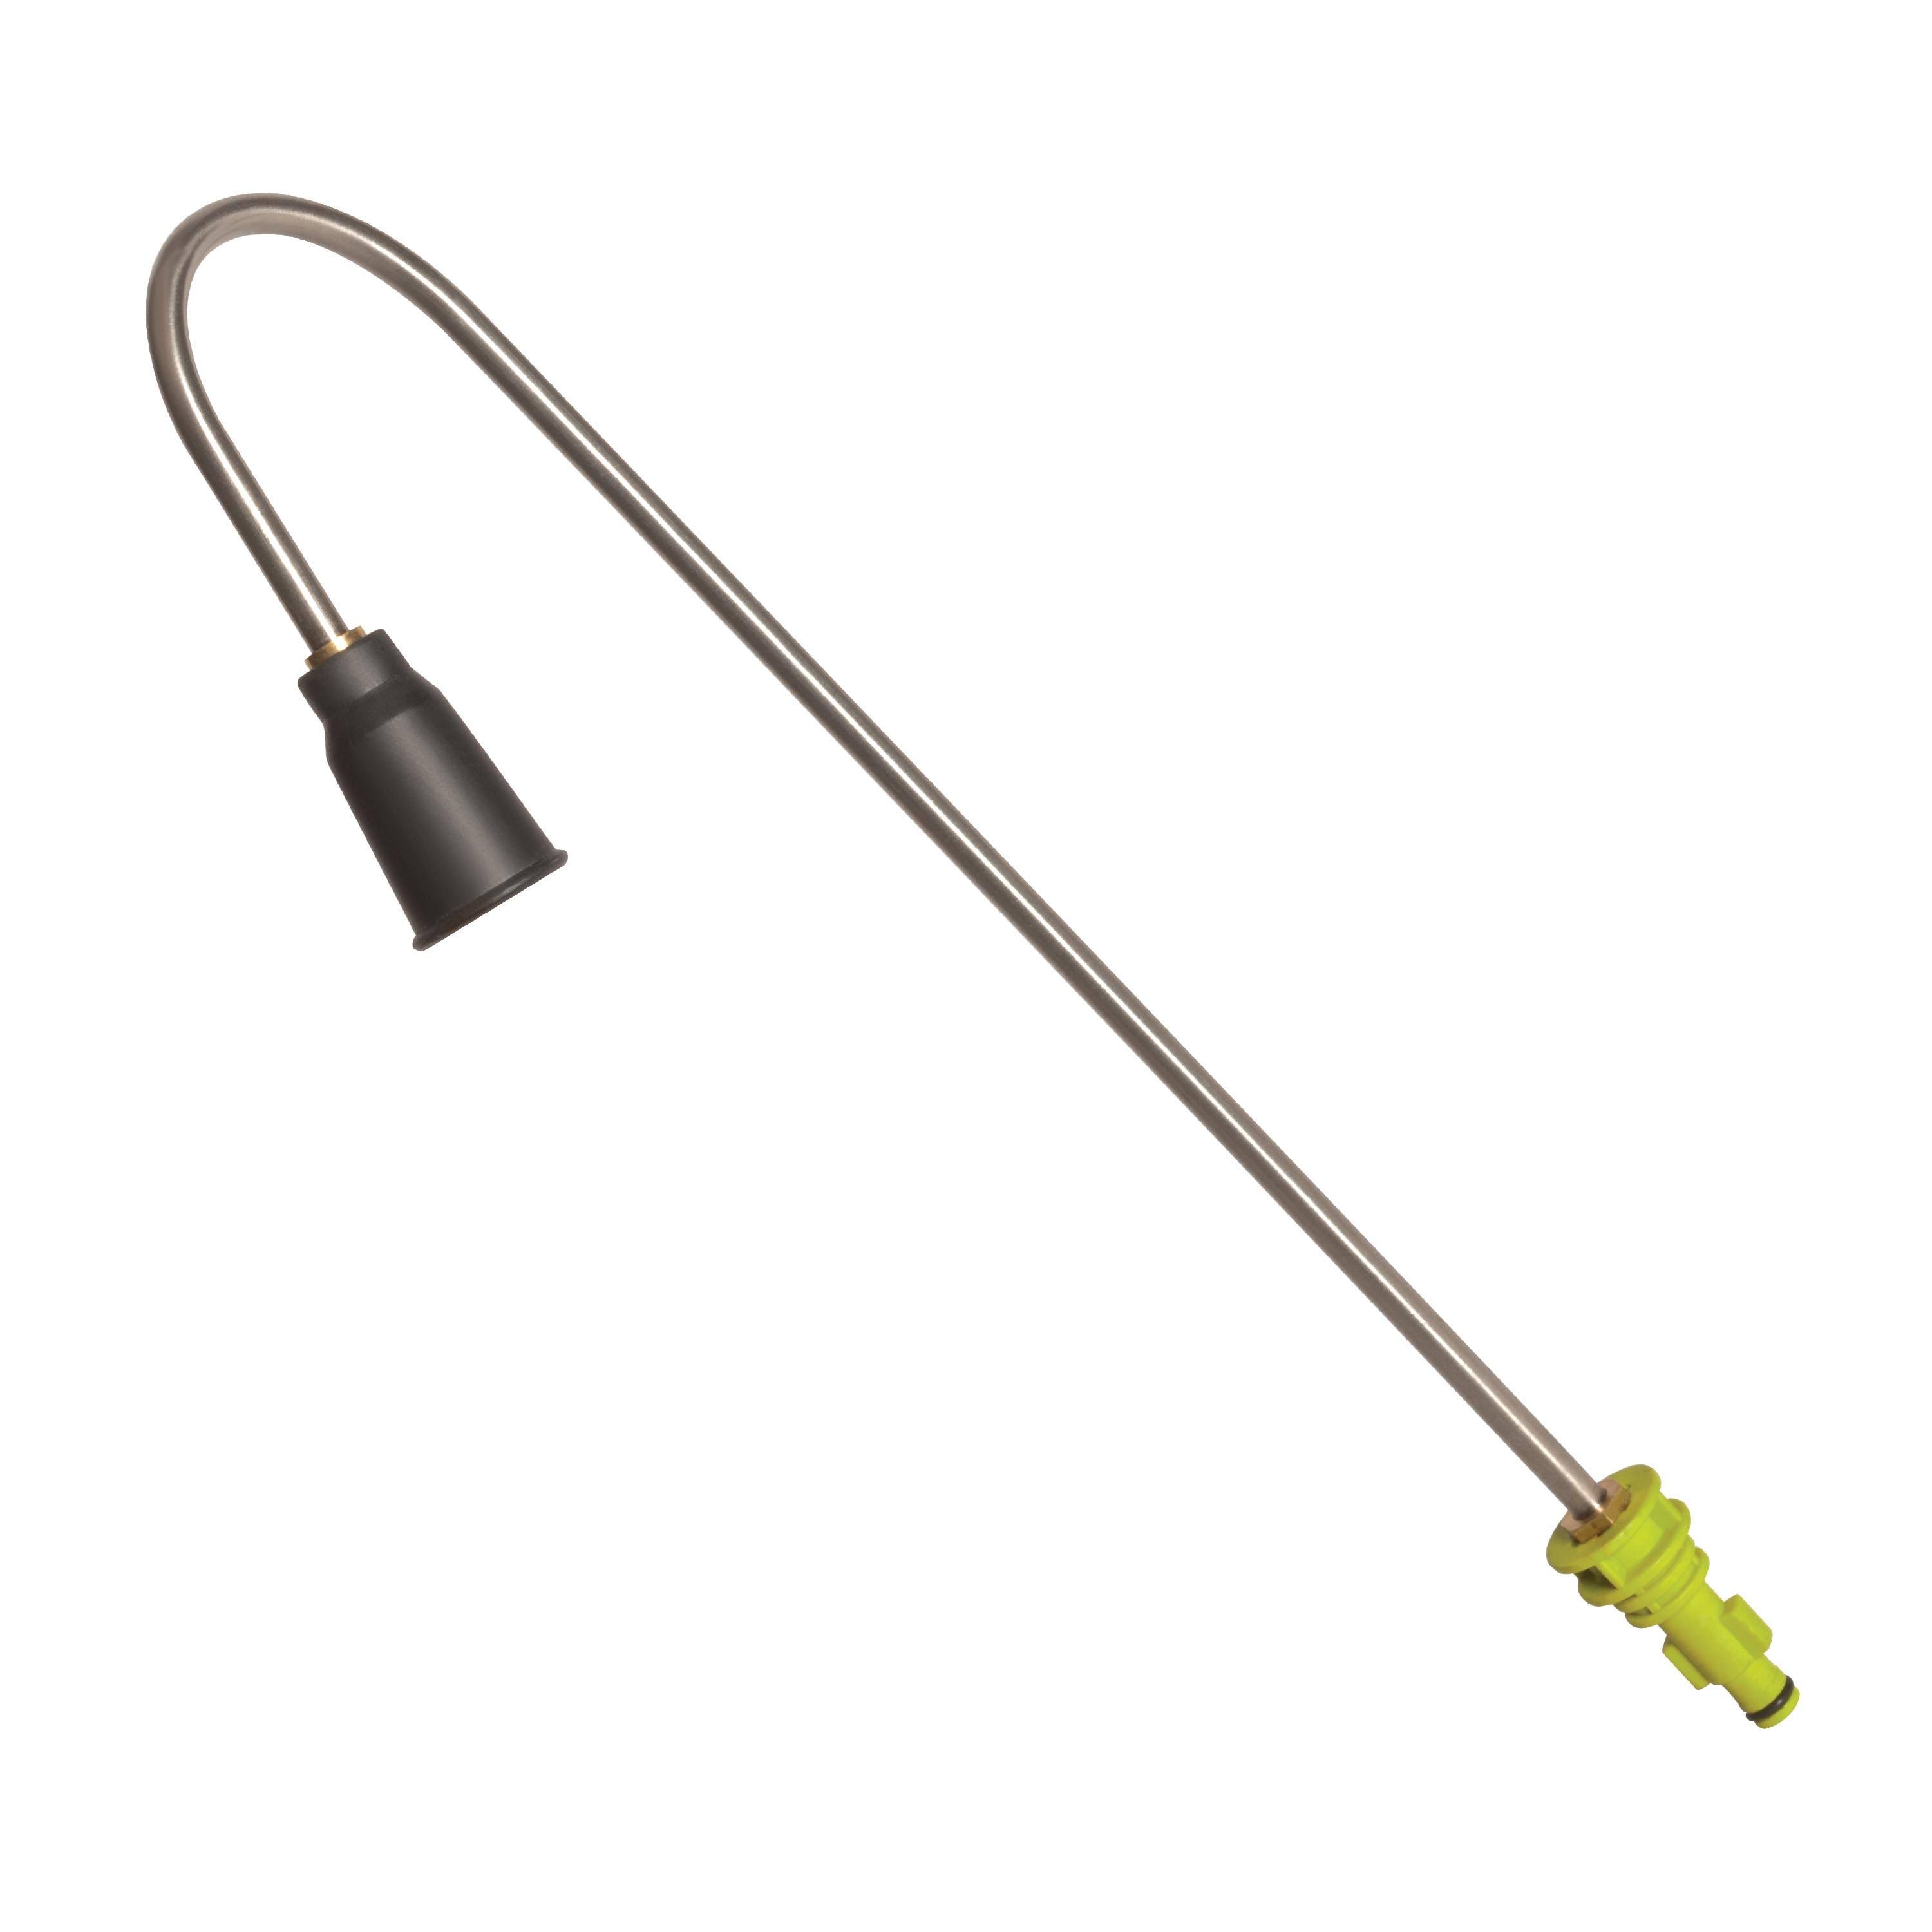 Effective Gutter Cleaning Attachment for Sun Joe Pressure Washer | Image